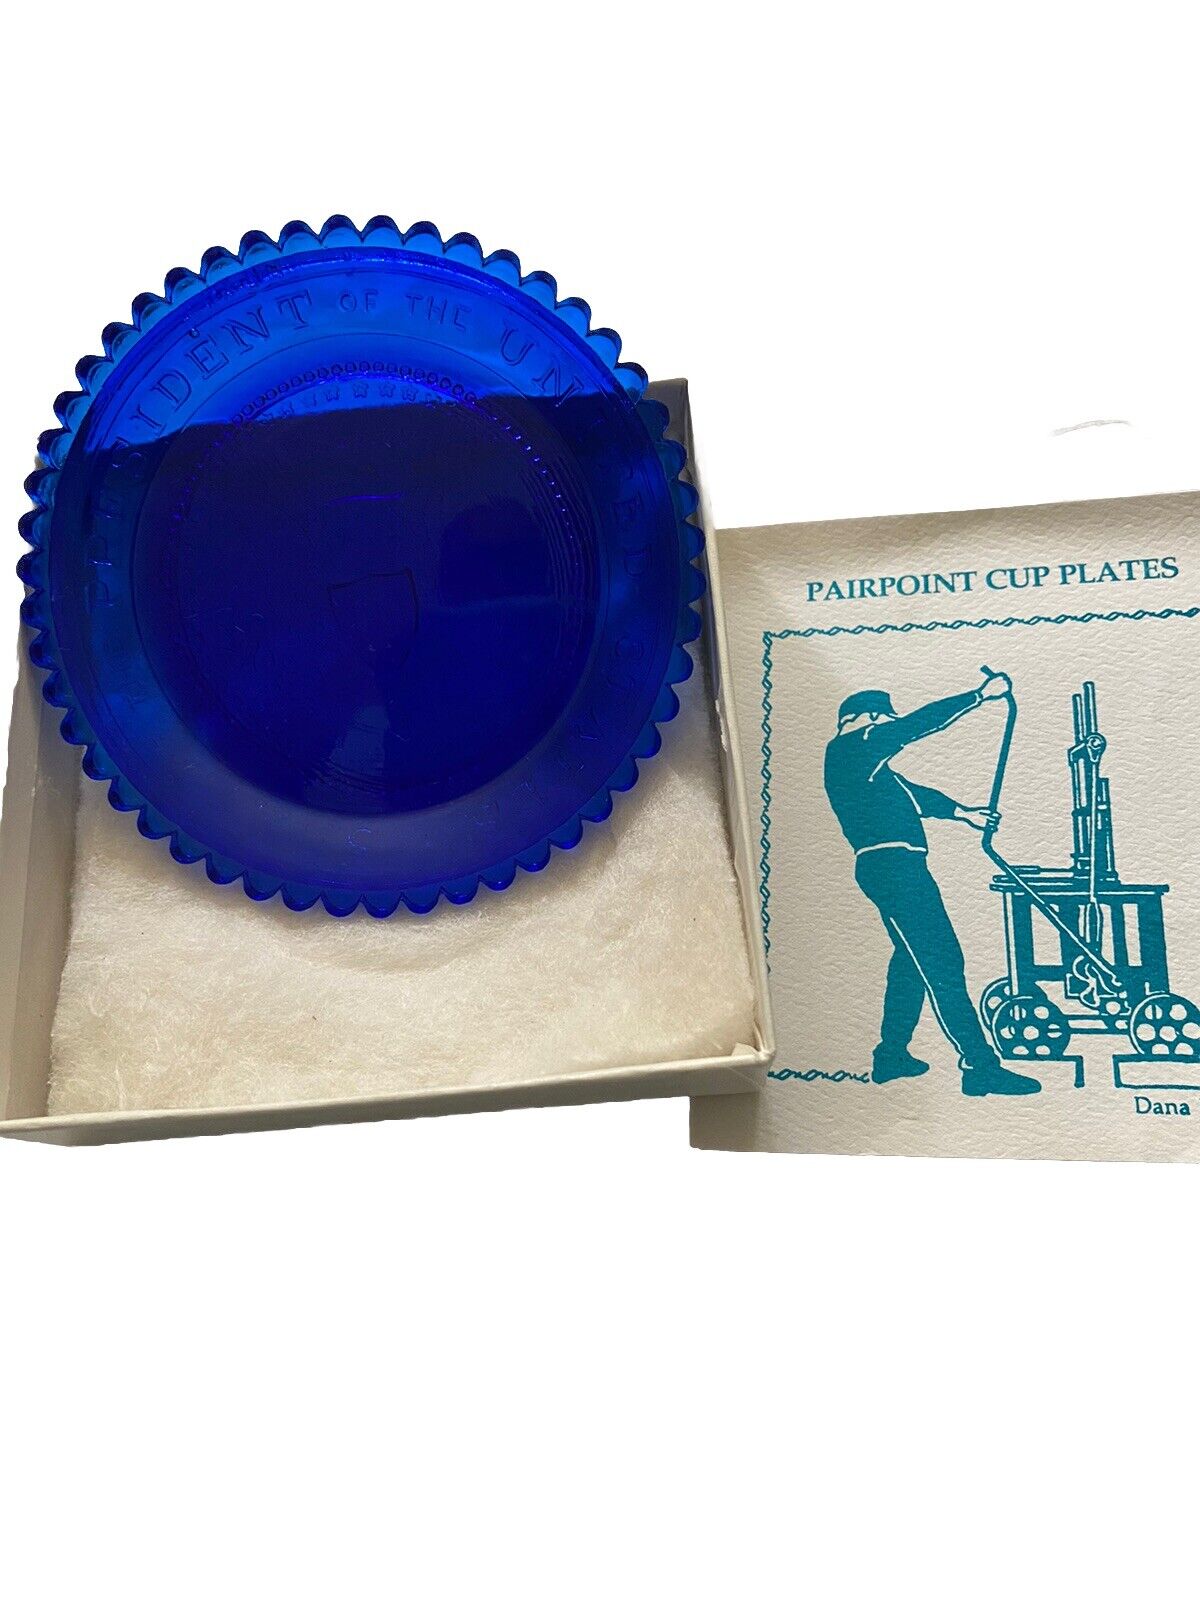 Vintage Pairpoint Blue Glass Cup Plate US President Seal